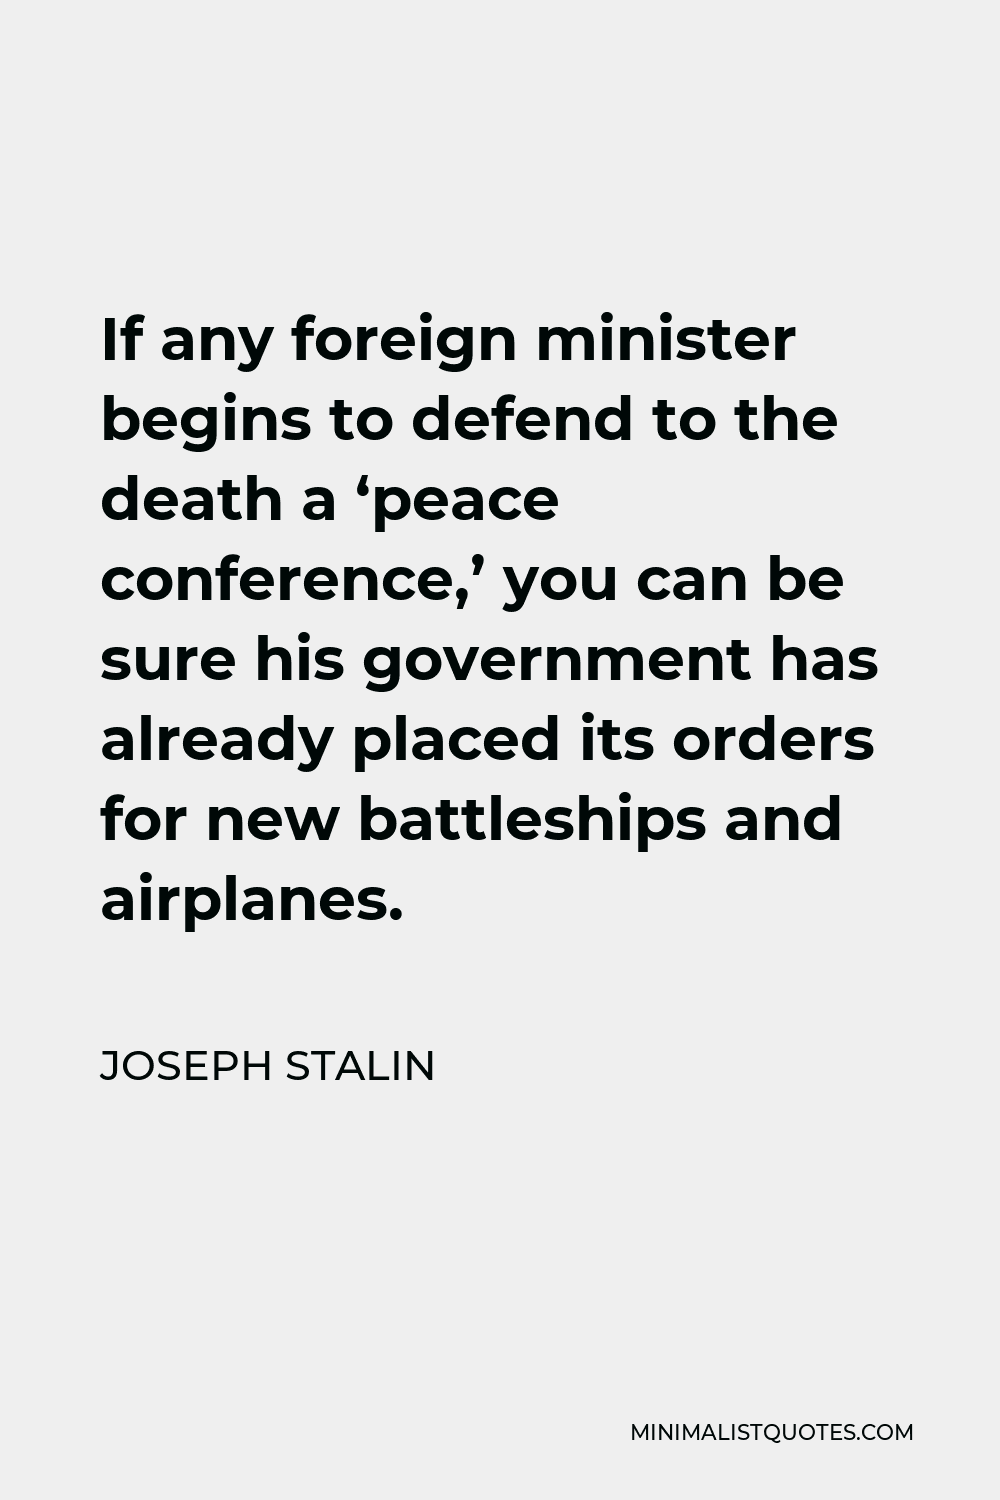 Joseph Stalin Quote - If any foreign minister begins to defend to the death a ‘peace conference,’ you can be sure his government has already placed its orders for new battleships and airplanes.